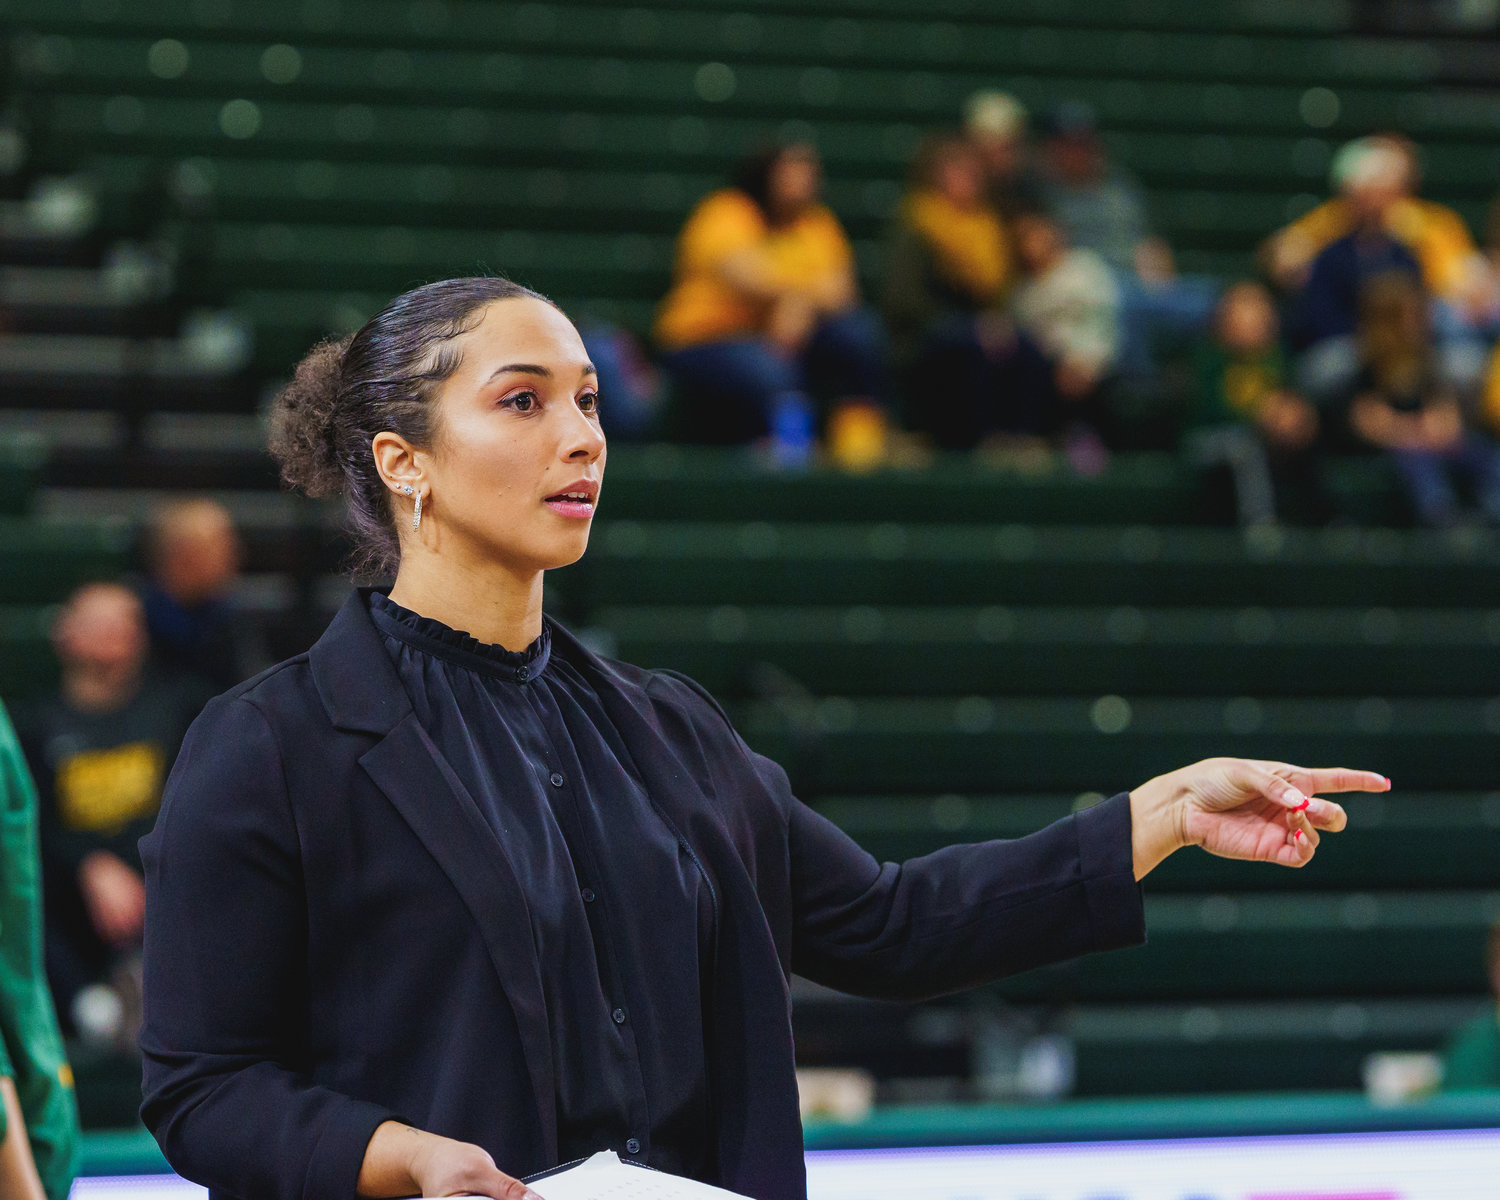 Mexico alum and newly hired Texas A&M Commerce assistant women's basketball coach Brooke Costley gives instructions to a player at her previous school, North Dakota State University.